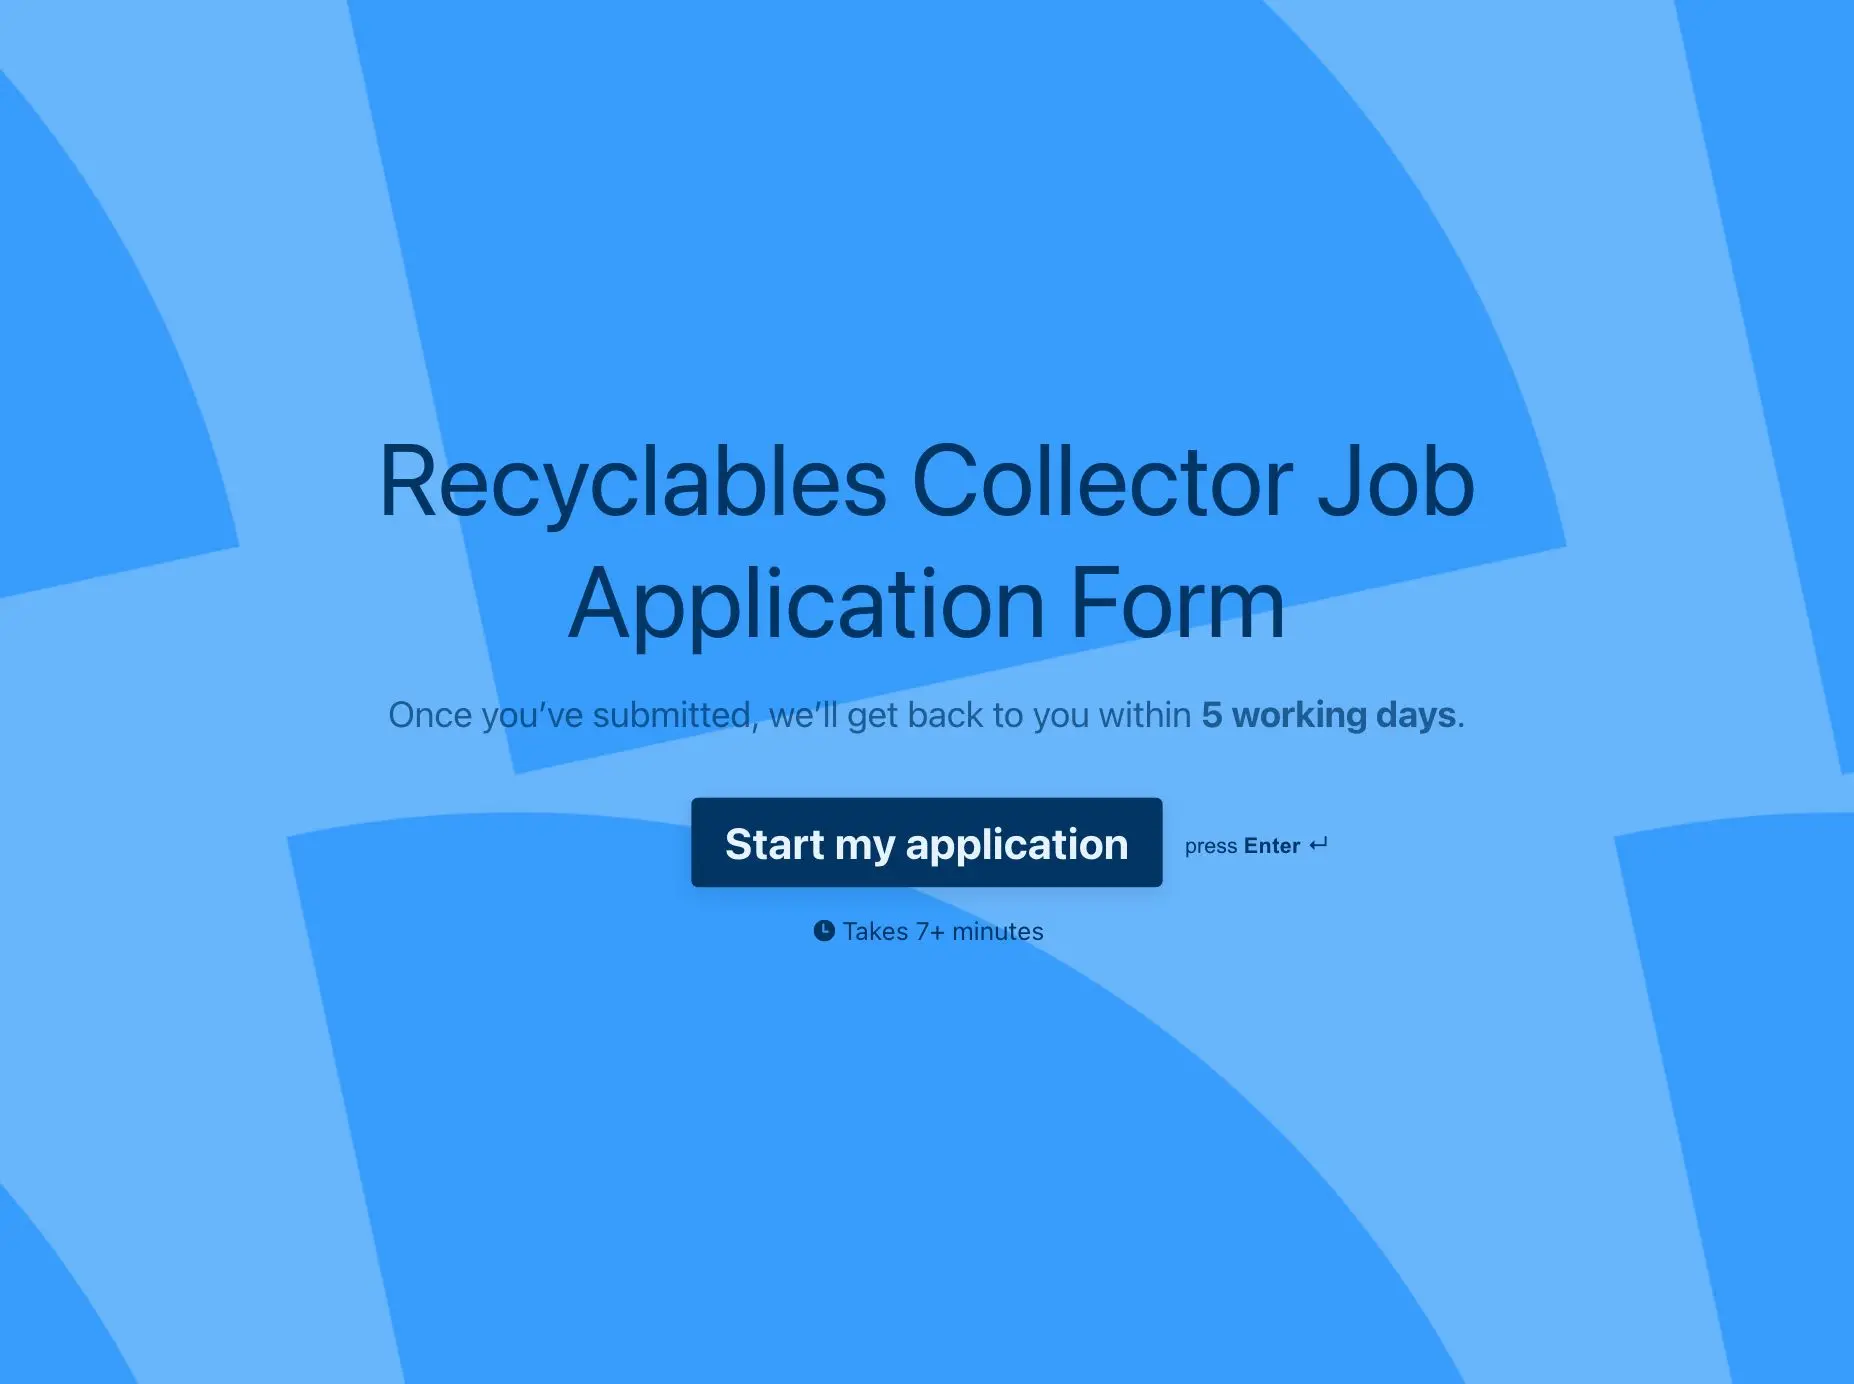 Recyclables Collector Job Application Form Template Hero